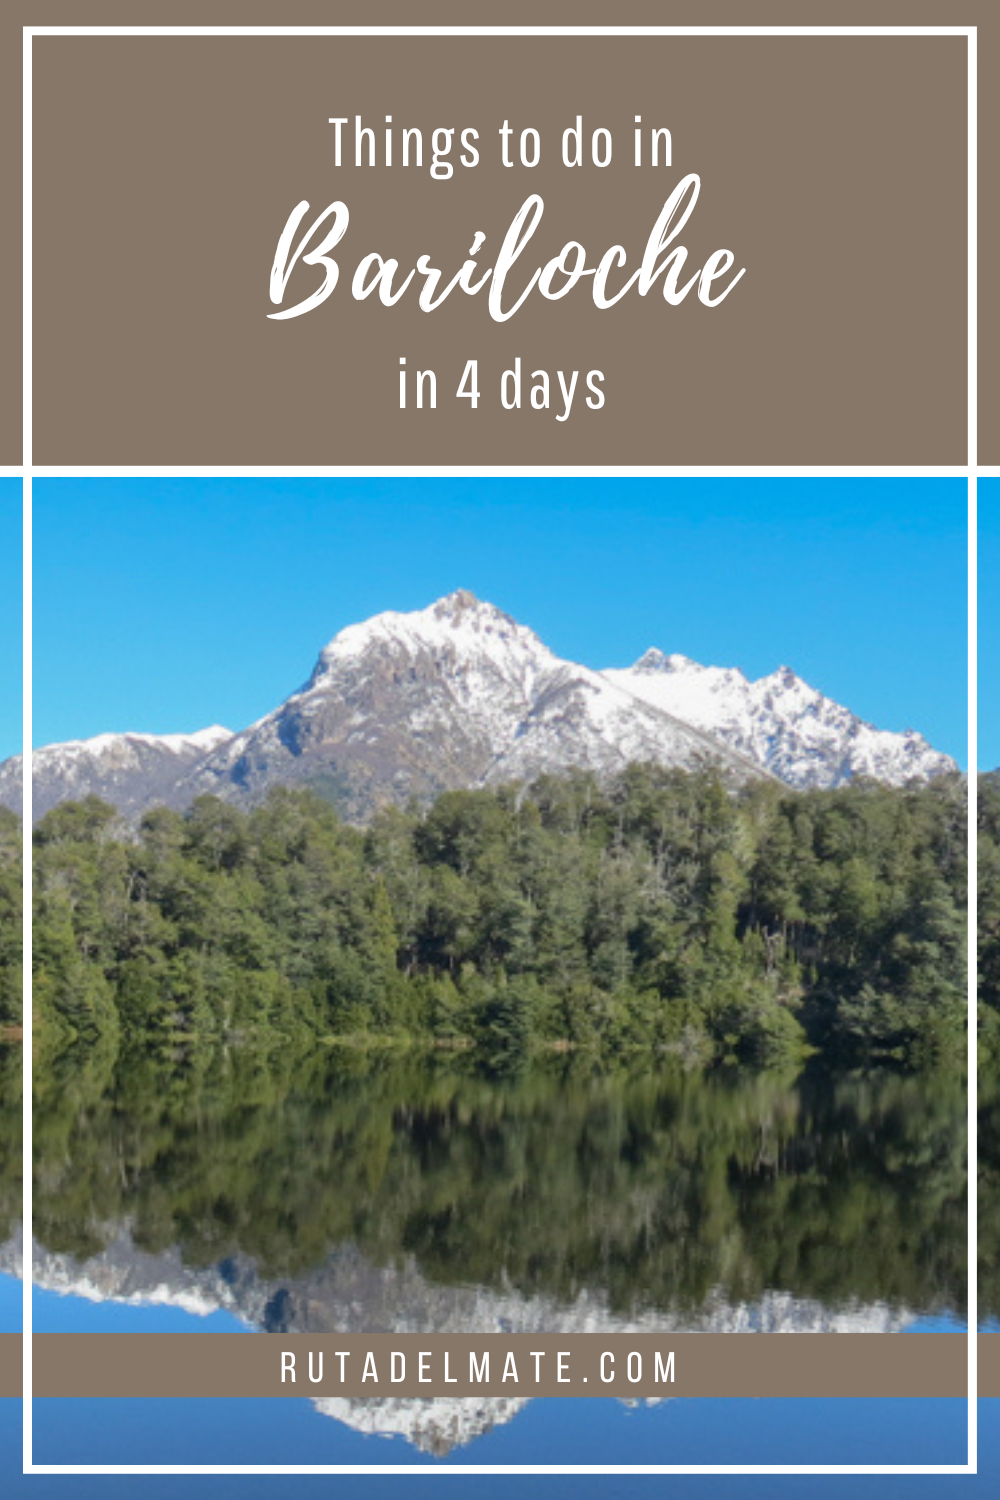 Things to do in Bariloche in 4 days